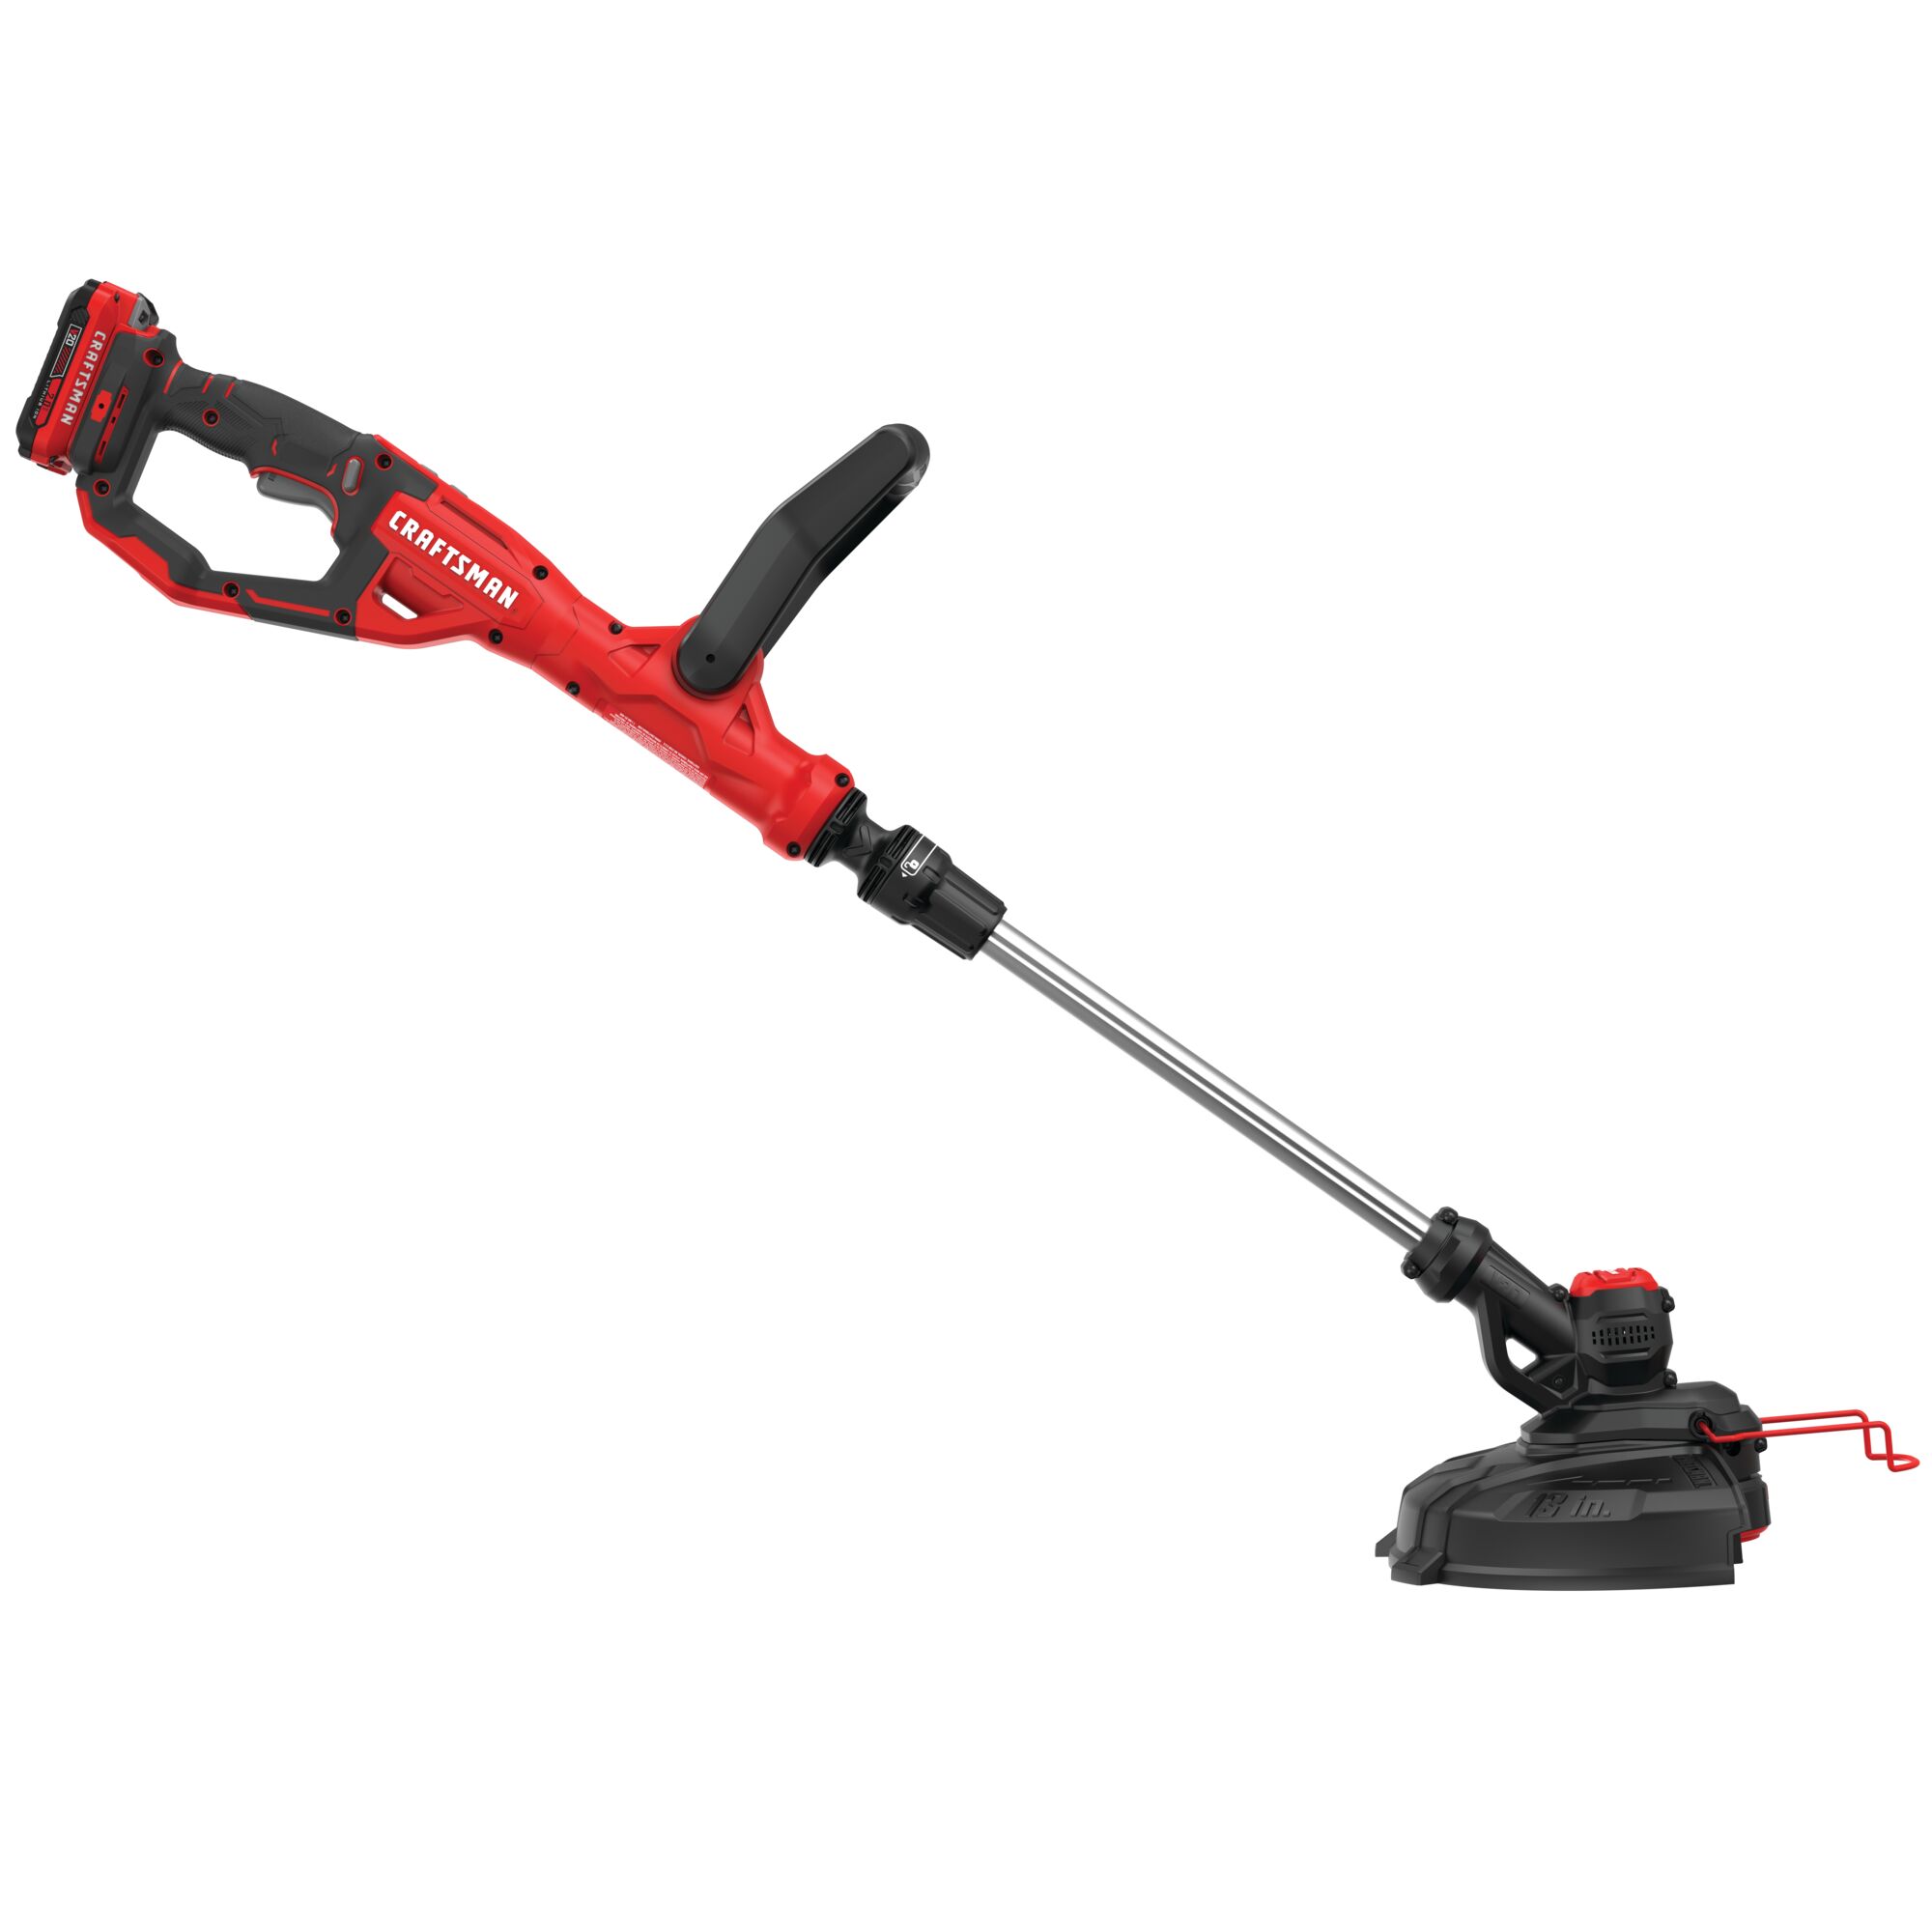 20 volt weedwacker 13 inch cordless string trimmer and edger with automatic feed kit.